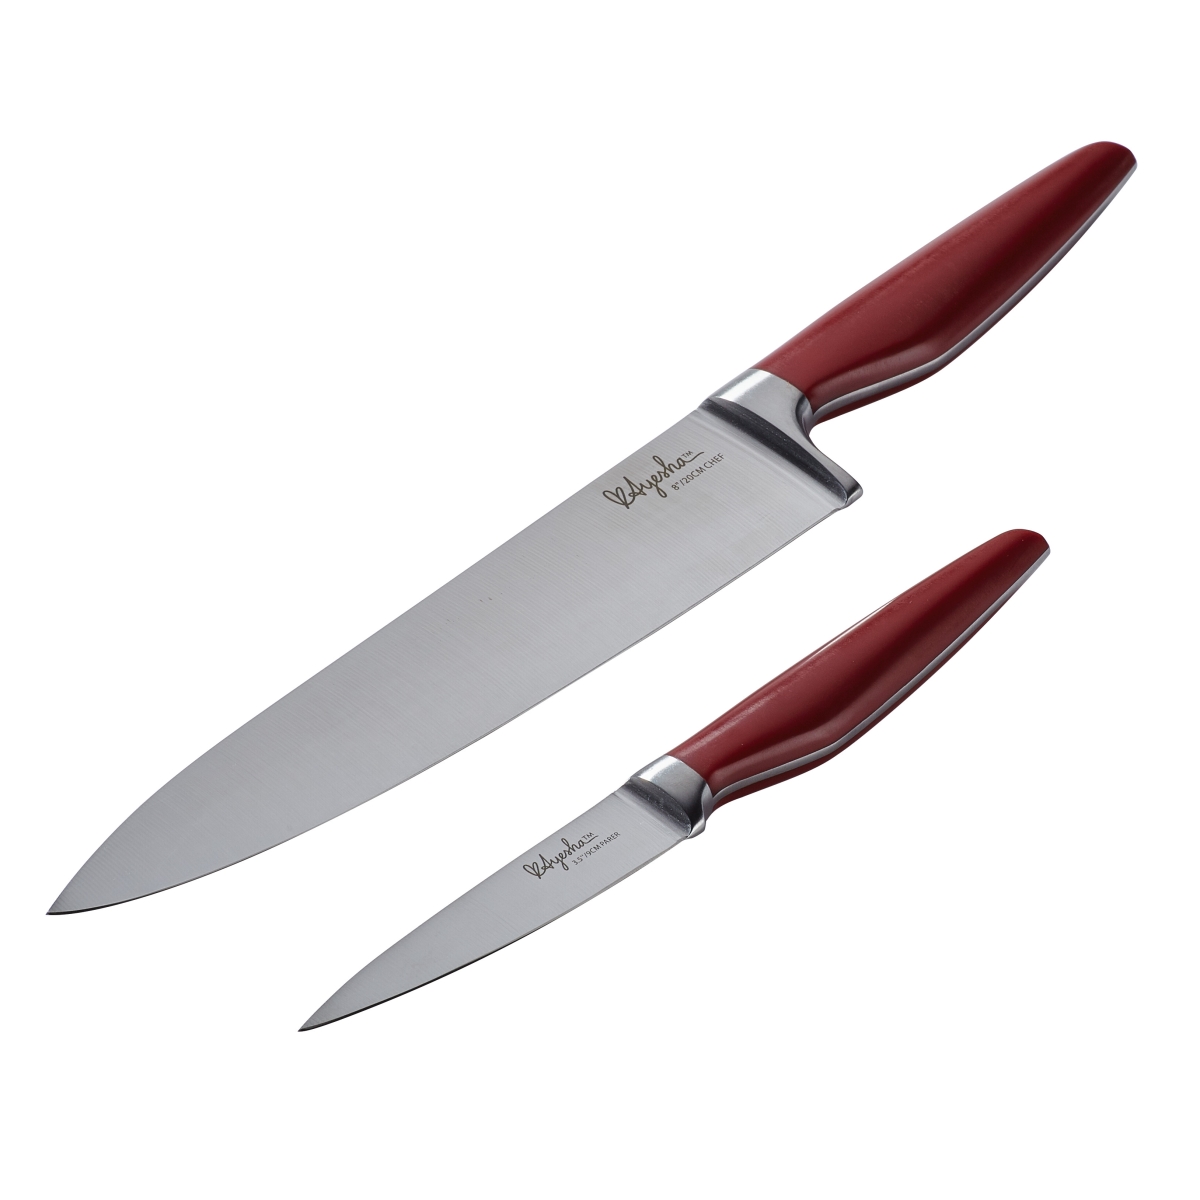 47055 Japanese Steel Cooking Knife Set, Sienna Red, 2 Piece